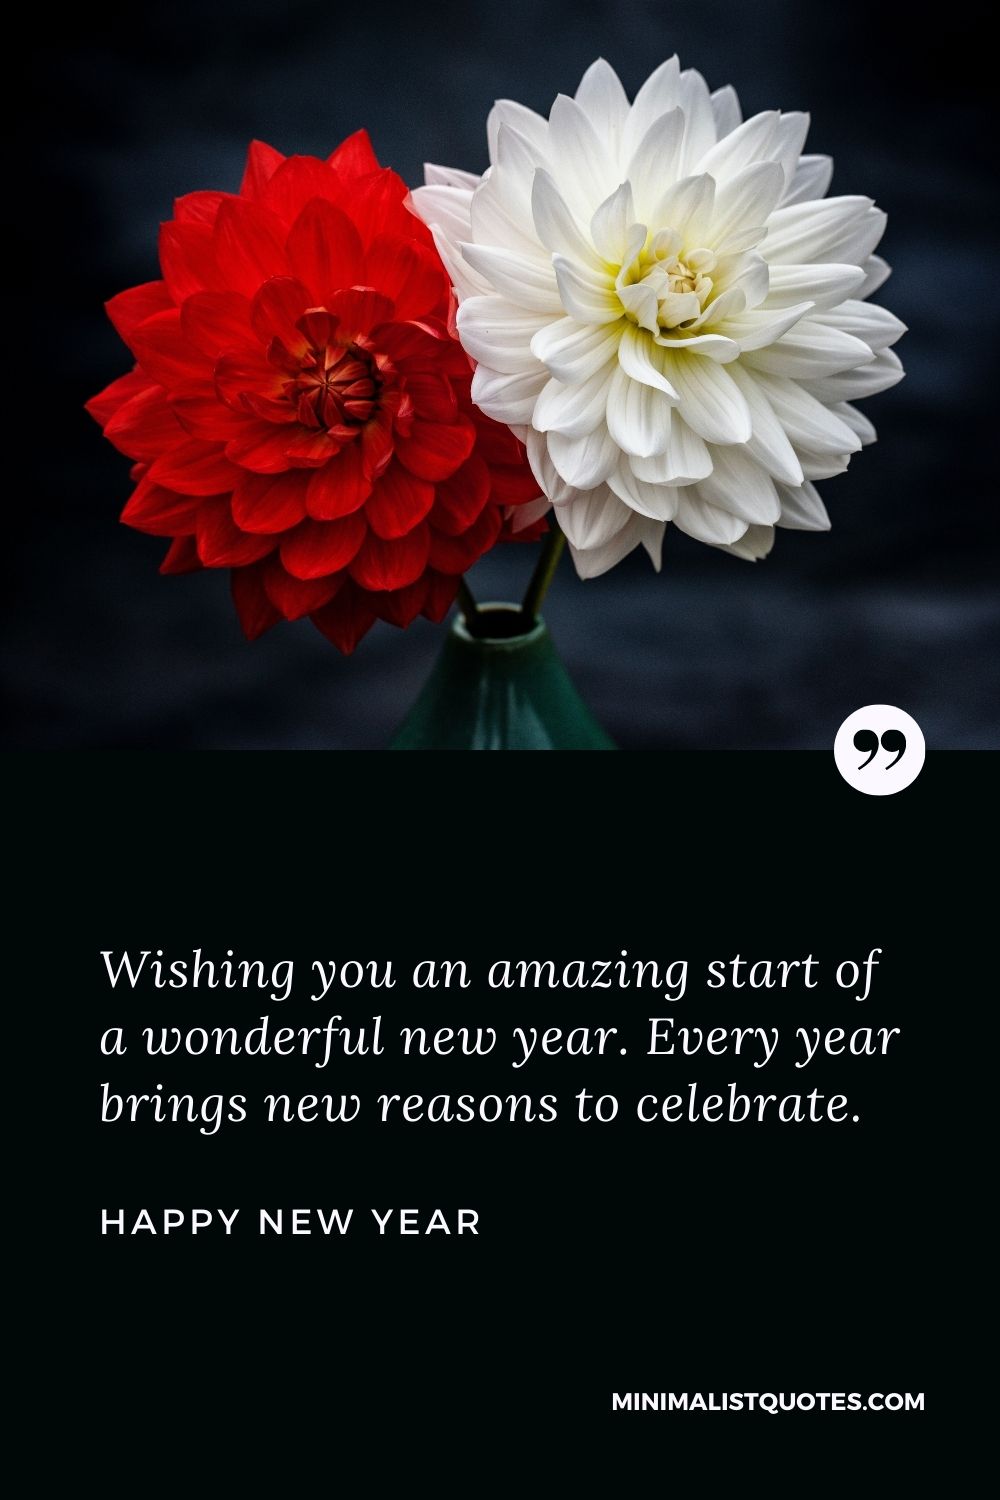 New Year Wish - Wishing you an amazing start of a wonderful new year. Every year brings new reasons to celebrate.